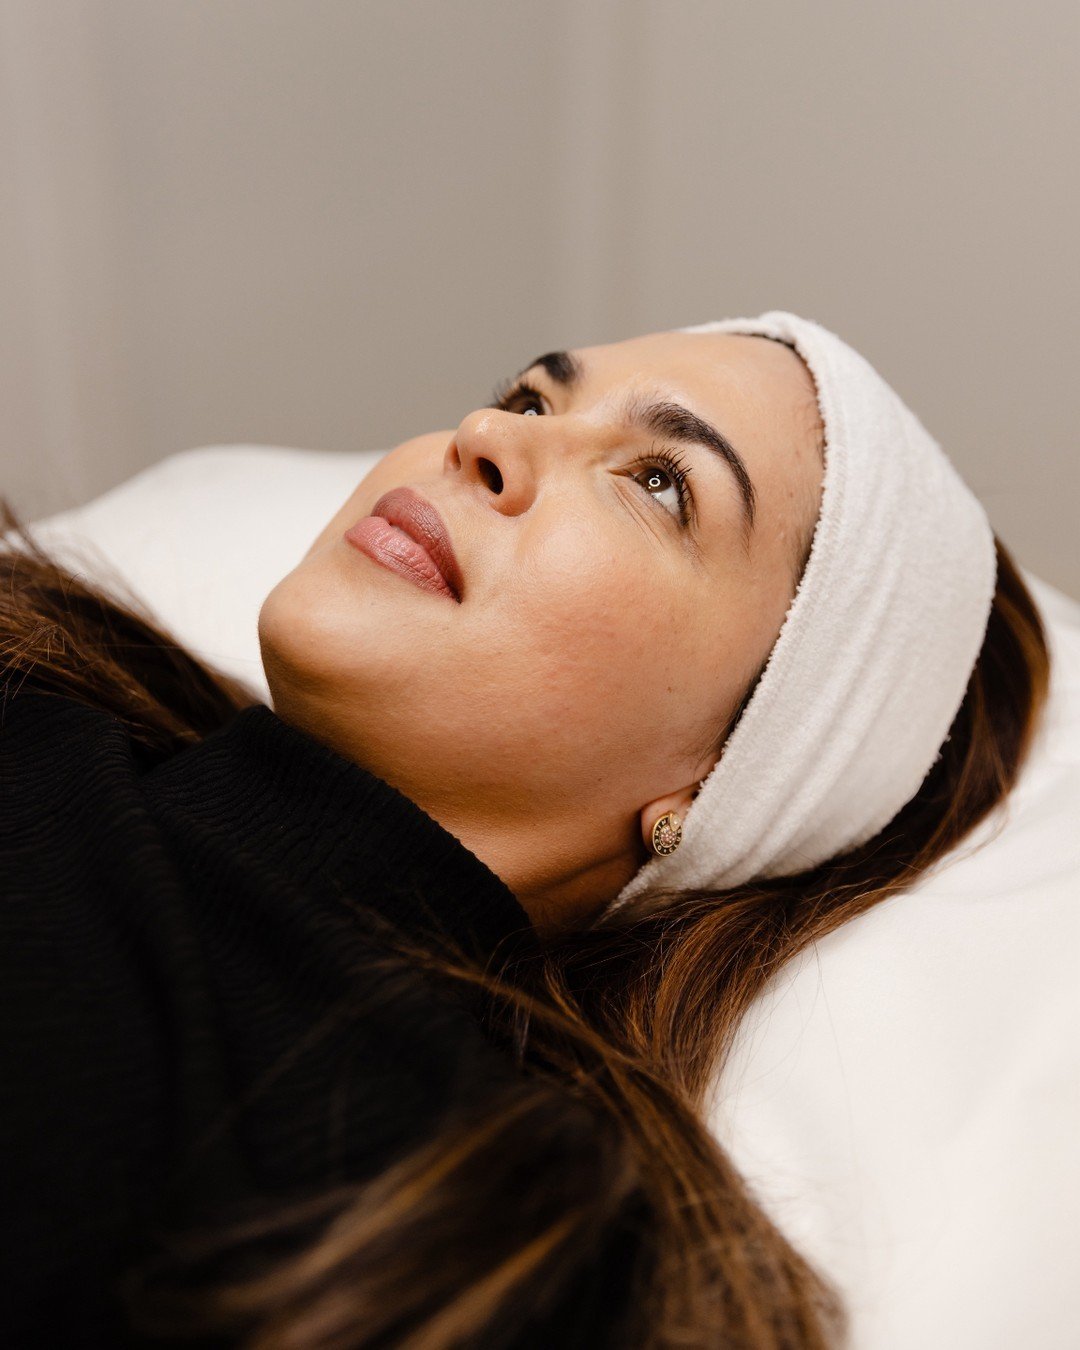 Feeling a bit fuzzy? 🤭

How does a luxury dermaplaning sound? Book online now for 20% off until May 31st!

This skin treatment will skim the dead skin cells and peach fuzz from your face leaving you with radiant, smooth, glowing skin. Just the refre